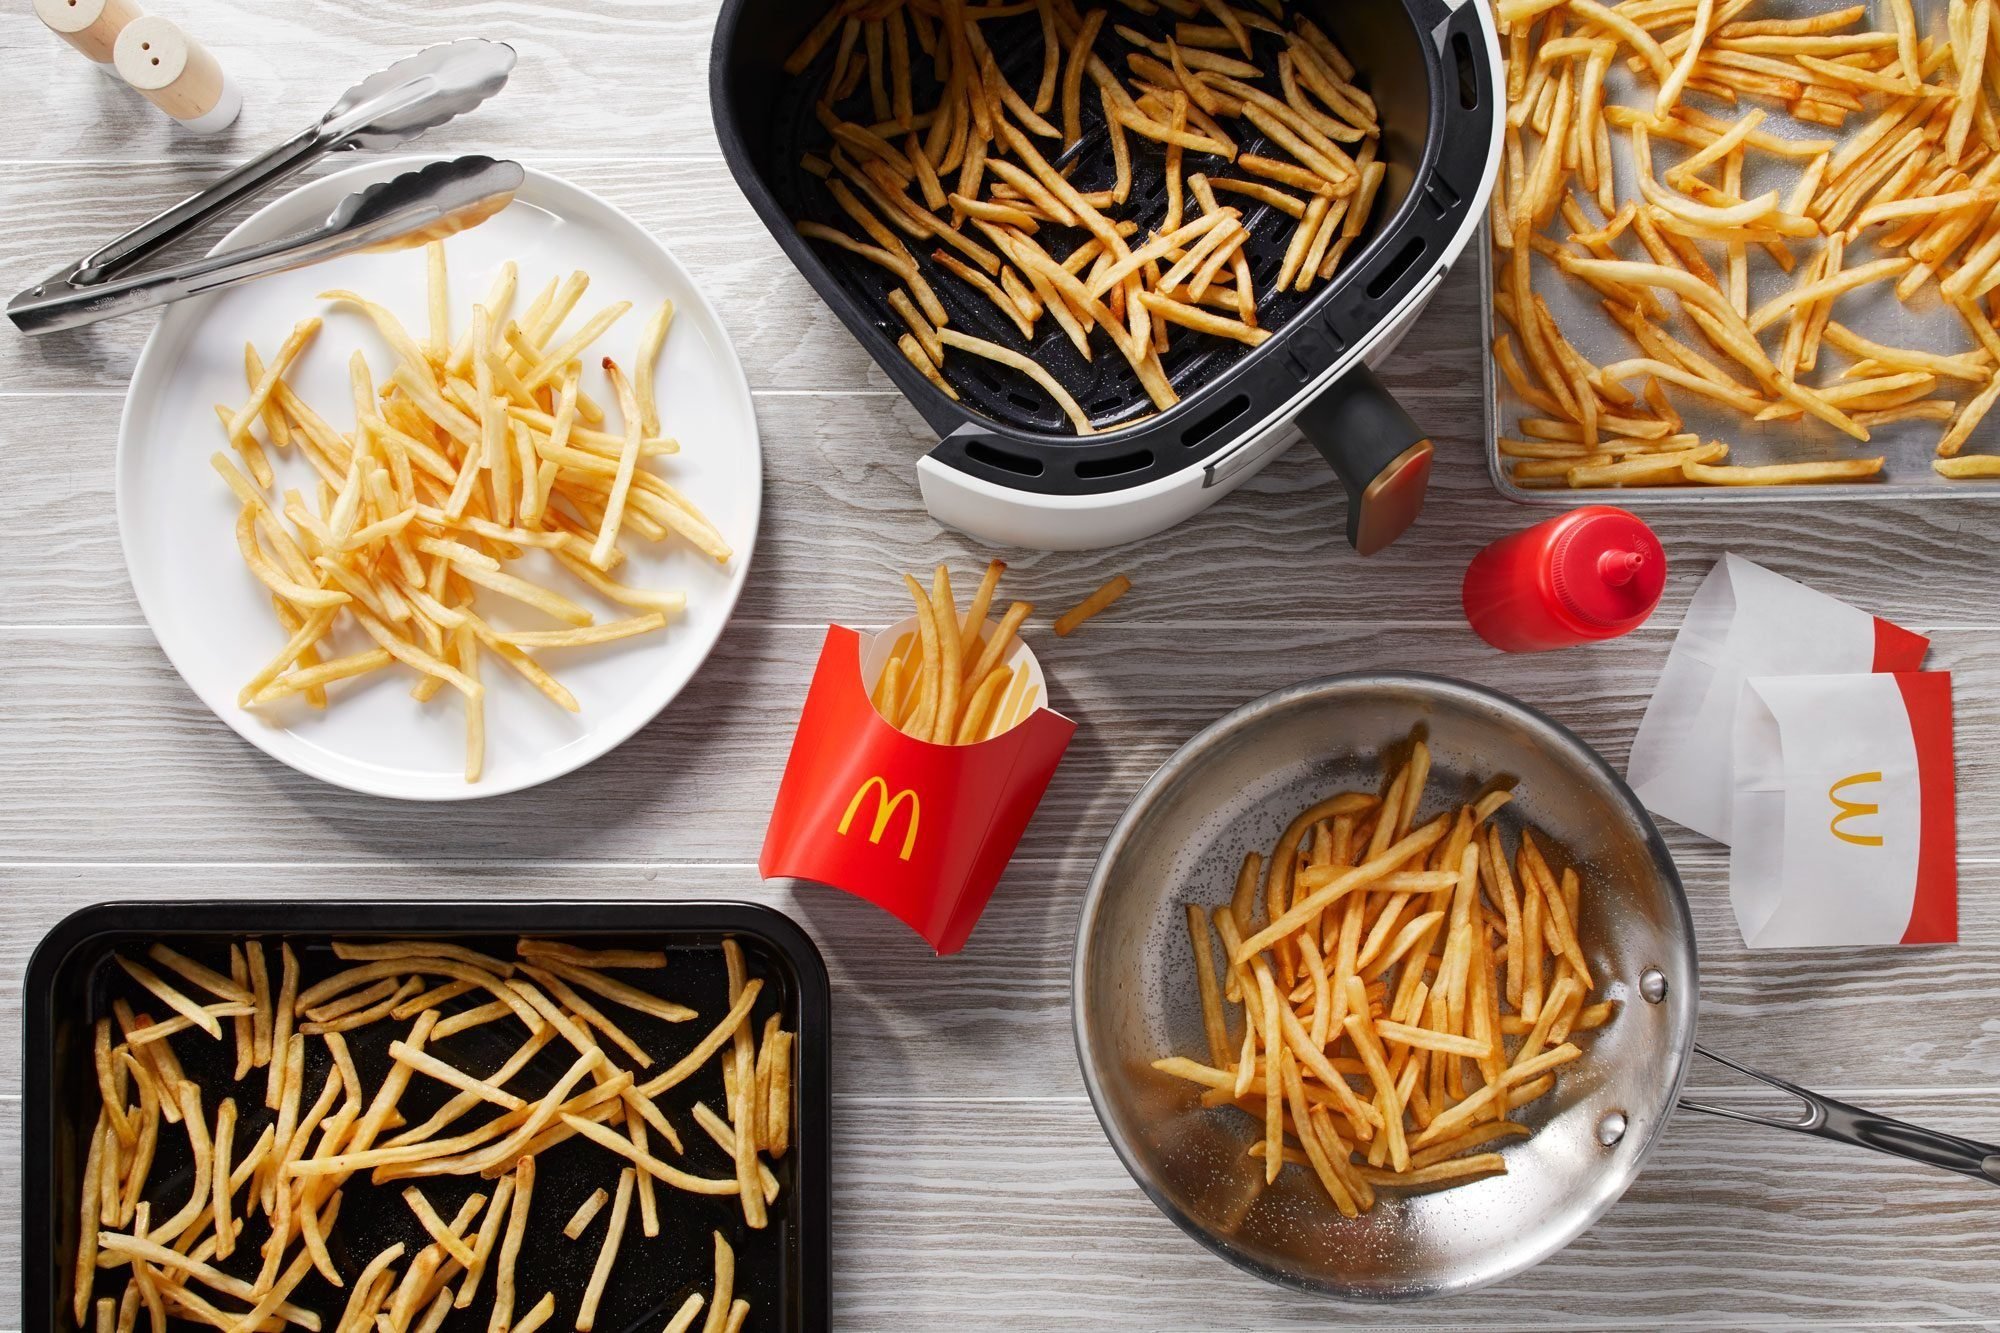 reheated mcdonalds fries on a plate, toaster oven pan, baking sheet, air fryer basket, and pan on light gray wood background